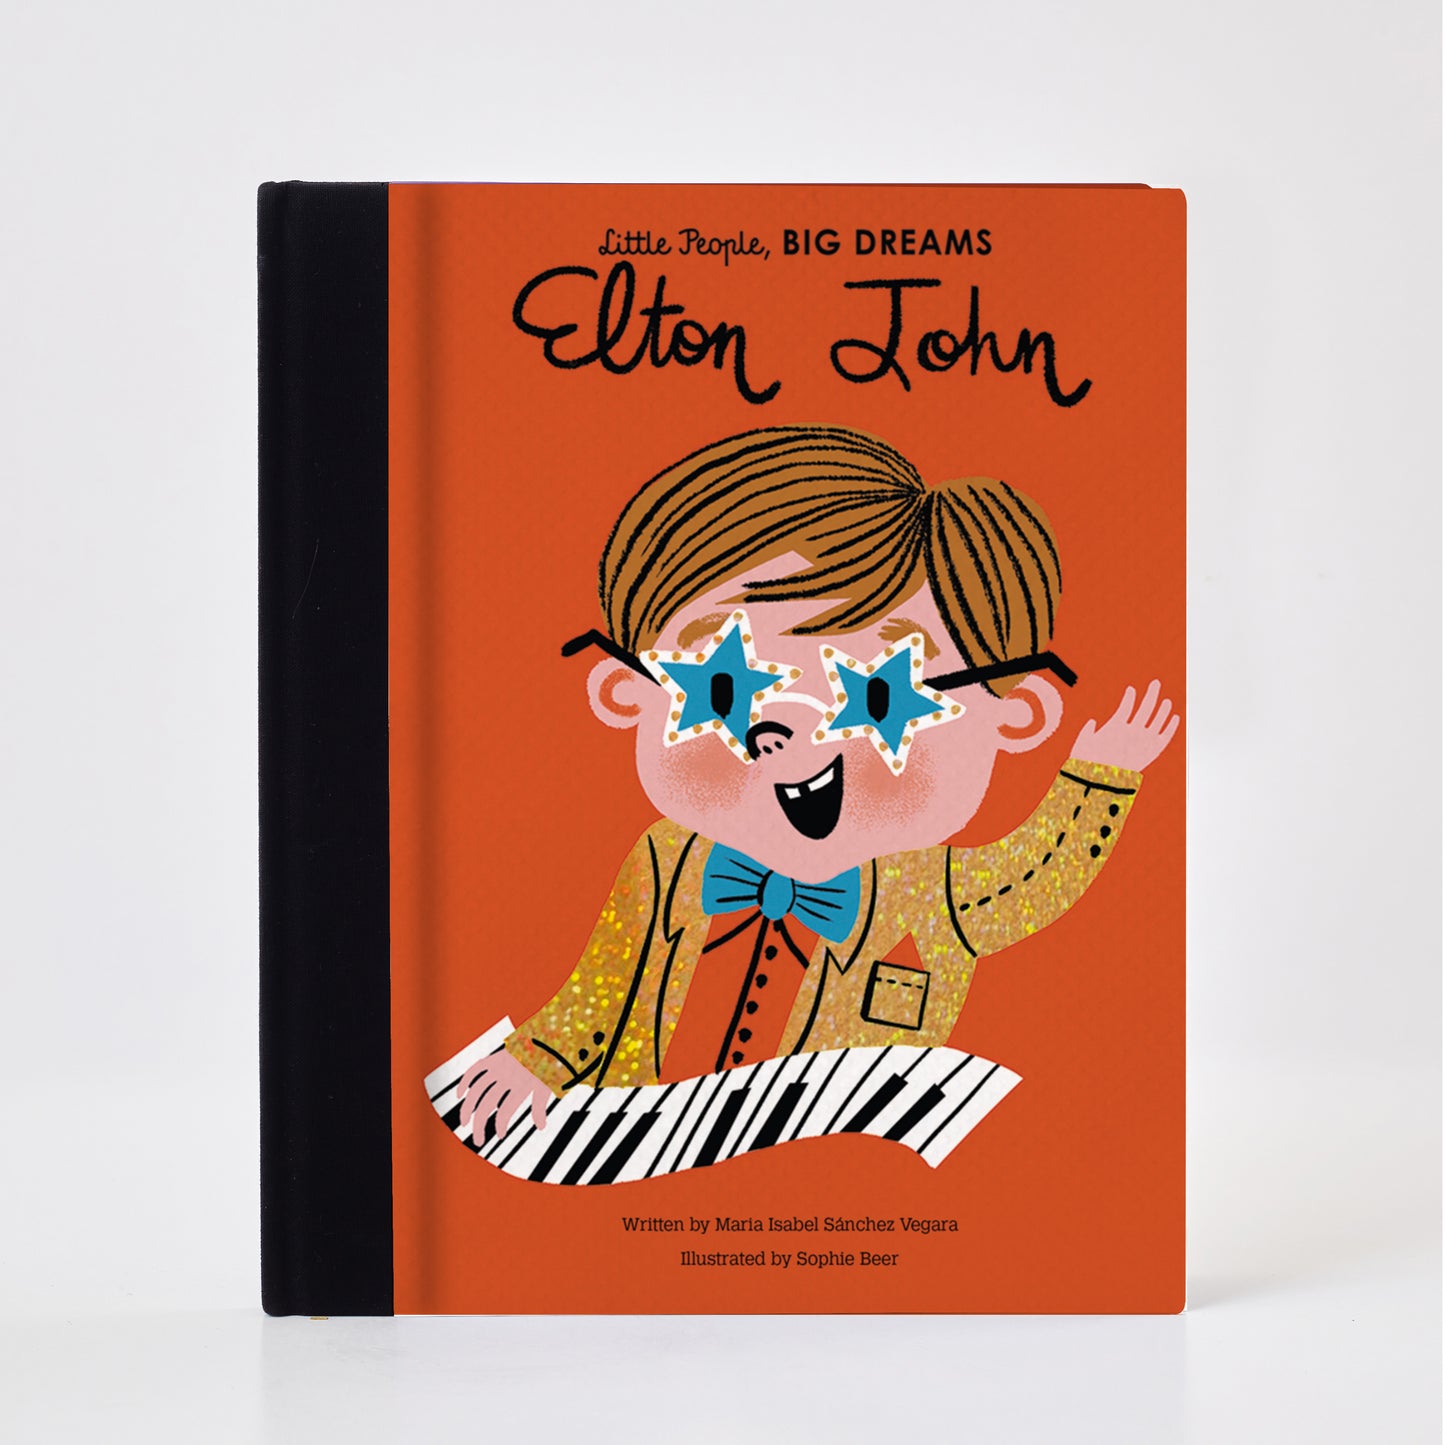 Meet Elton John: the piano wizard who rocketed to stardom with his music.  As a child, Elton started playing his grandmother's piano in Harrow, London. He could pick tunes out by ear and was soon attending lessons at the Royal Academy. After answering an advertisement in a newspaper, Elton teamed up with a lyric-writing buddy: Bernie Taupin. The rest was history. Elton's songwriting talent, musical skill, and dazzling outfits have made him one of the all-time greats. 